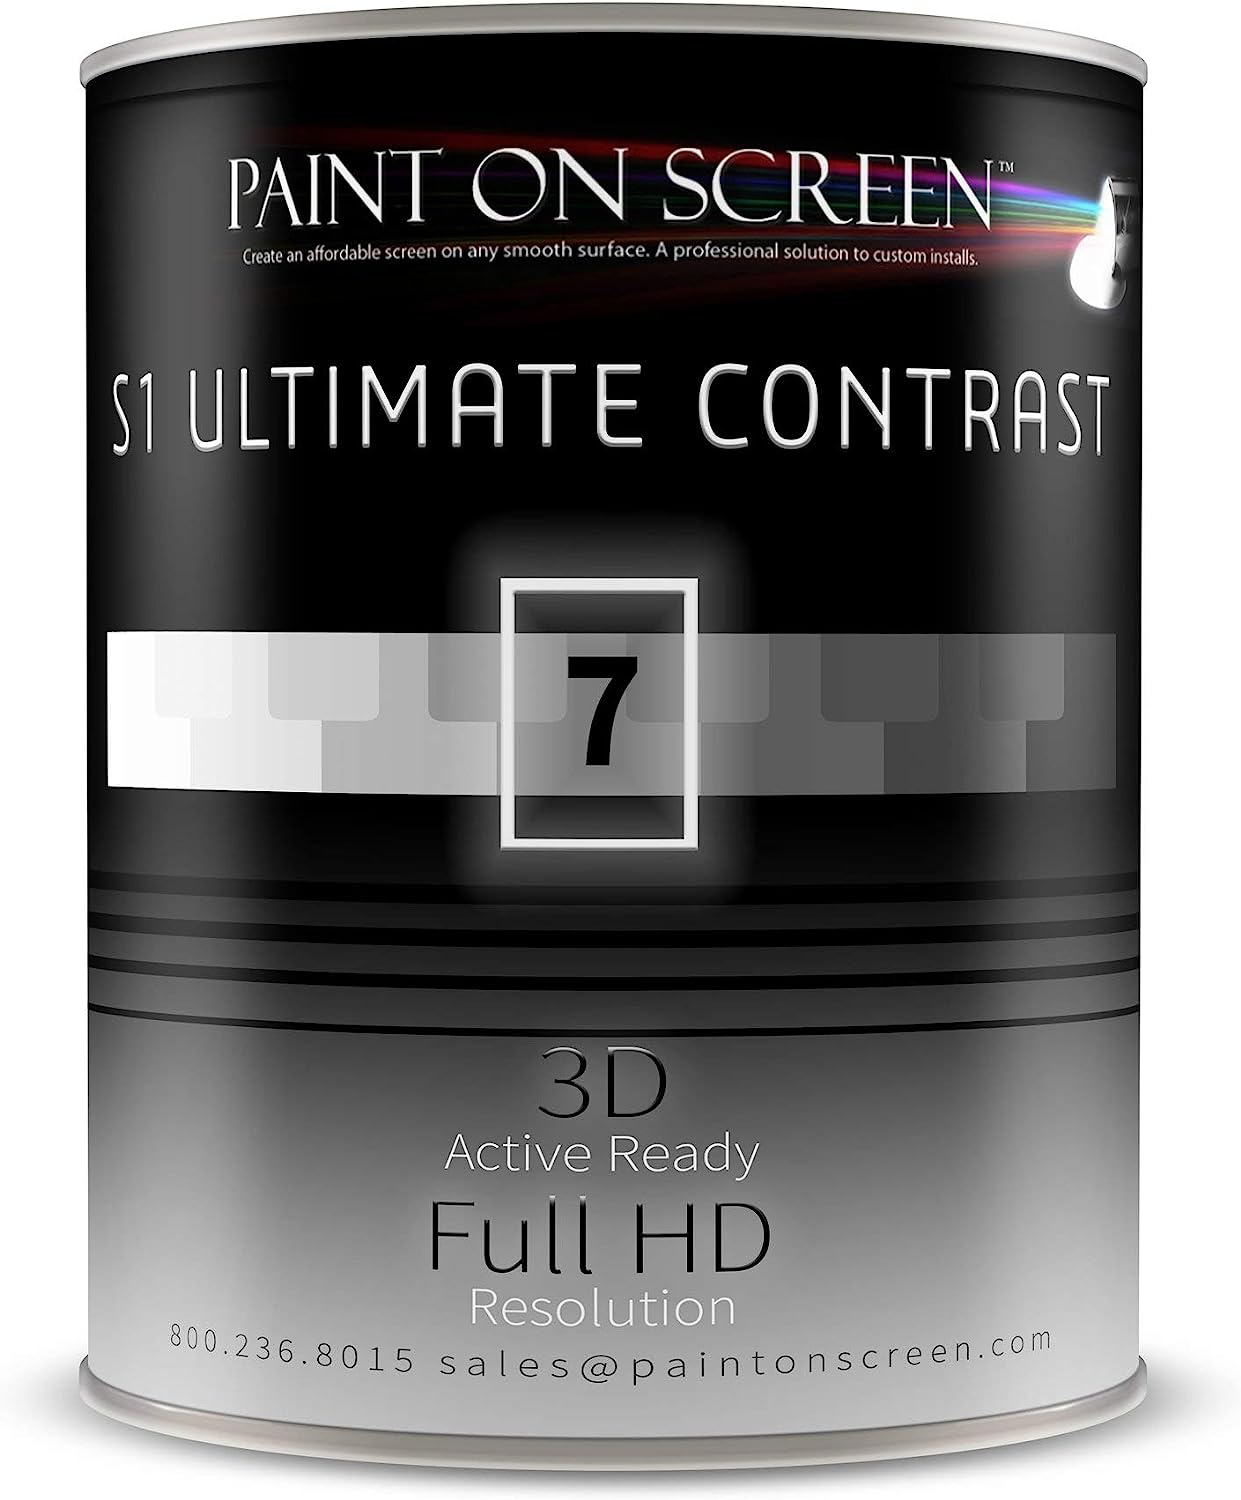 Paint On Screen Projection/Projector Screen Paint - S1 [...]